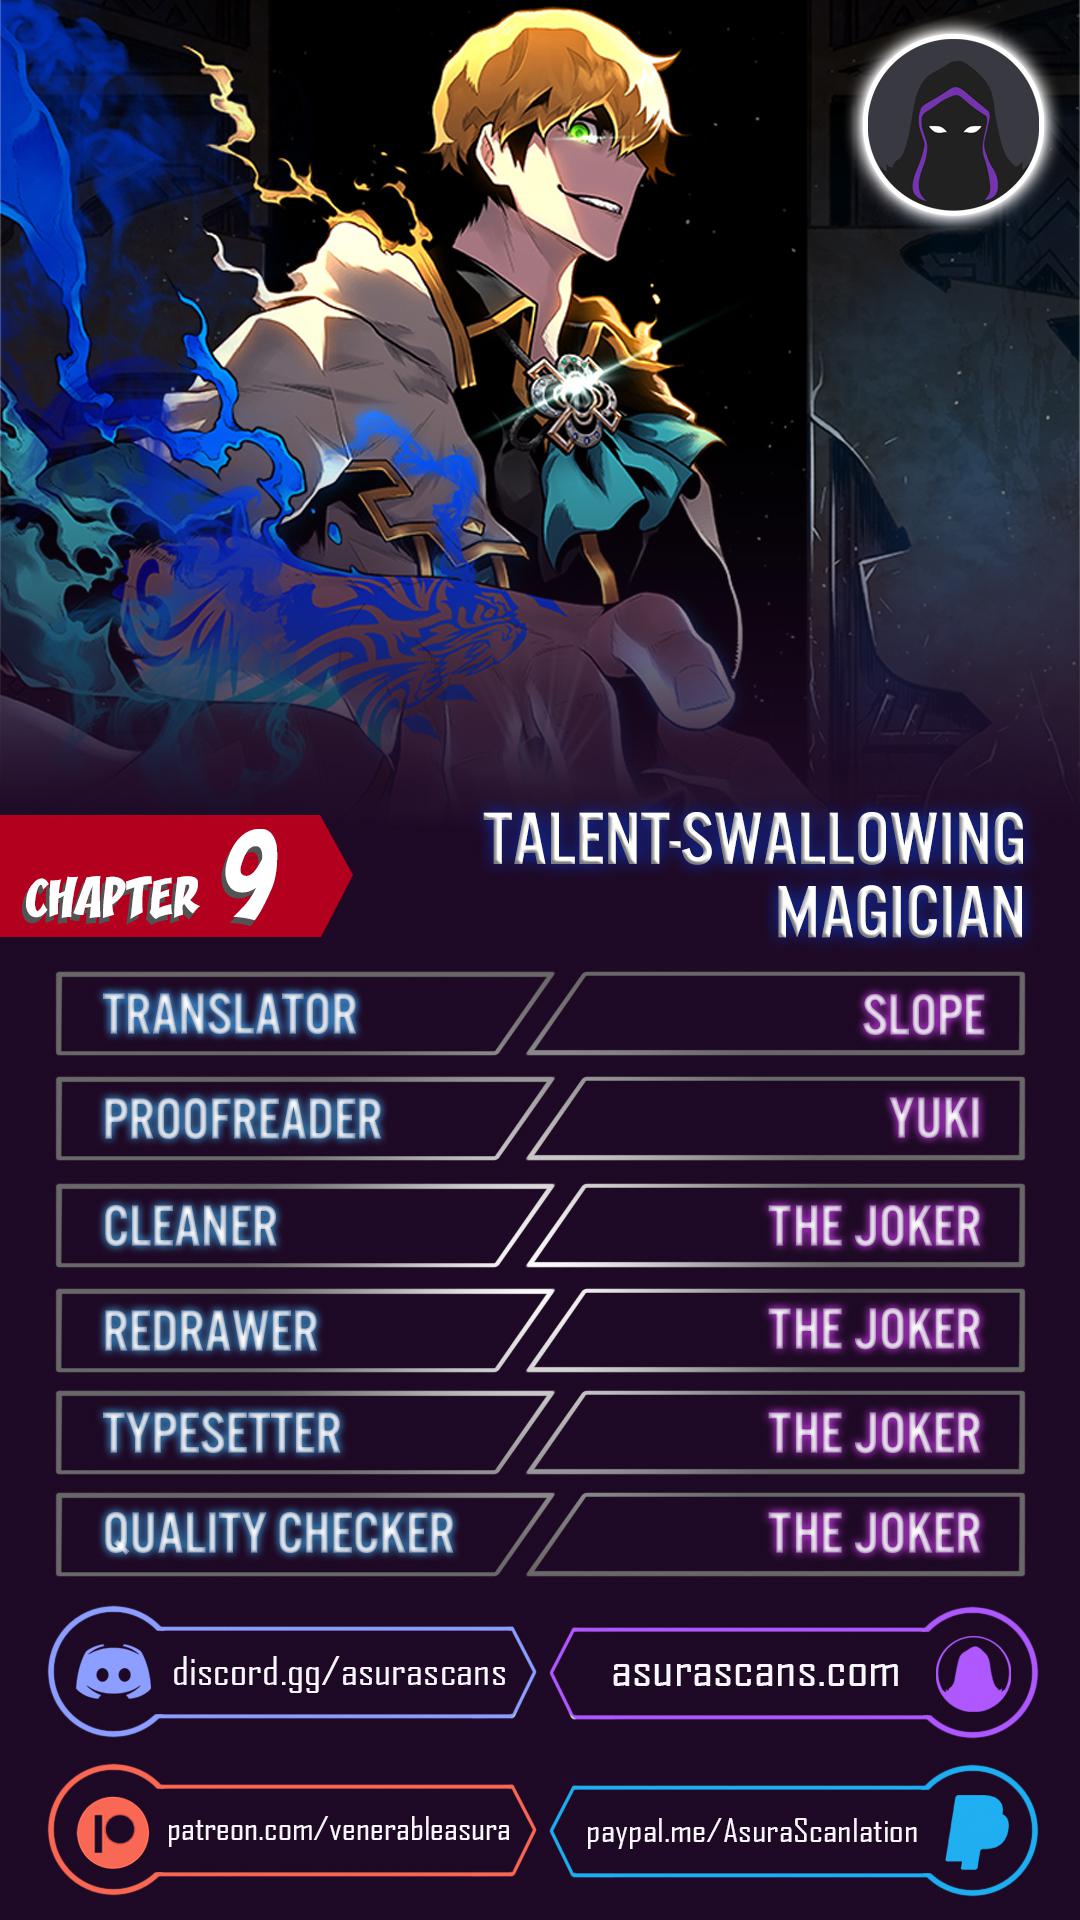 Talent-Swallowing Magician, Chapter 9 image 1